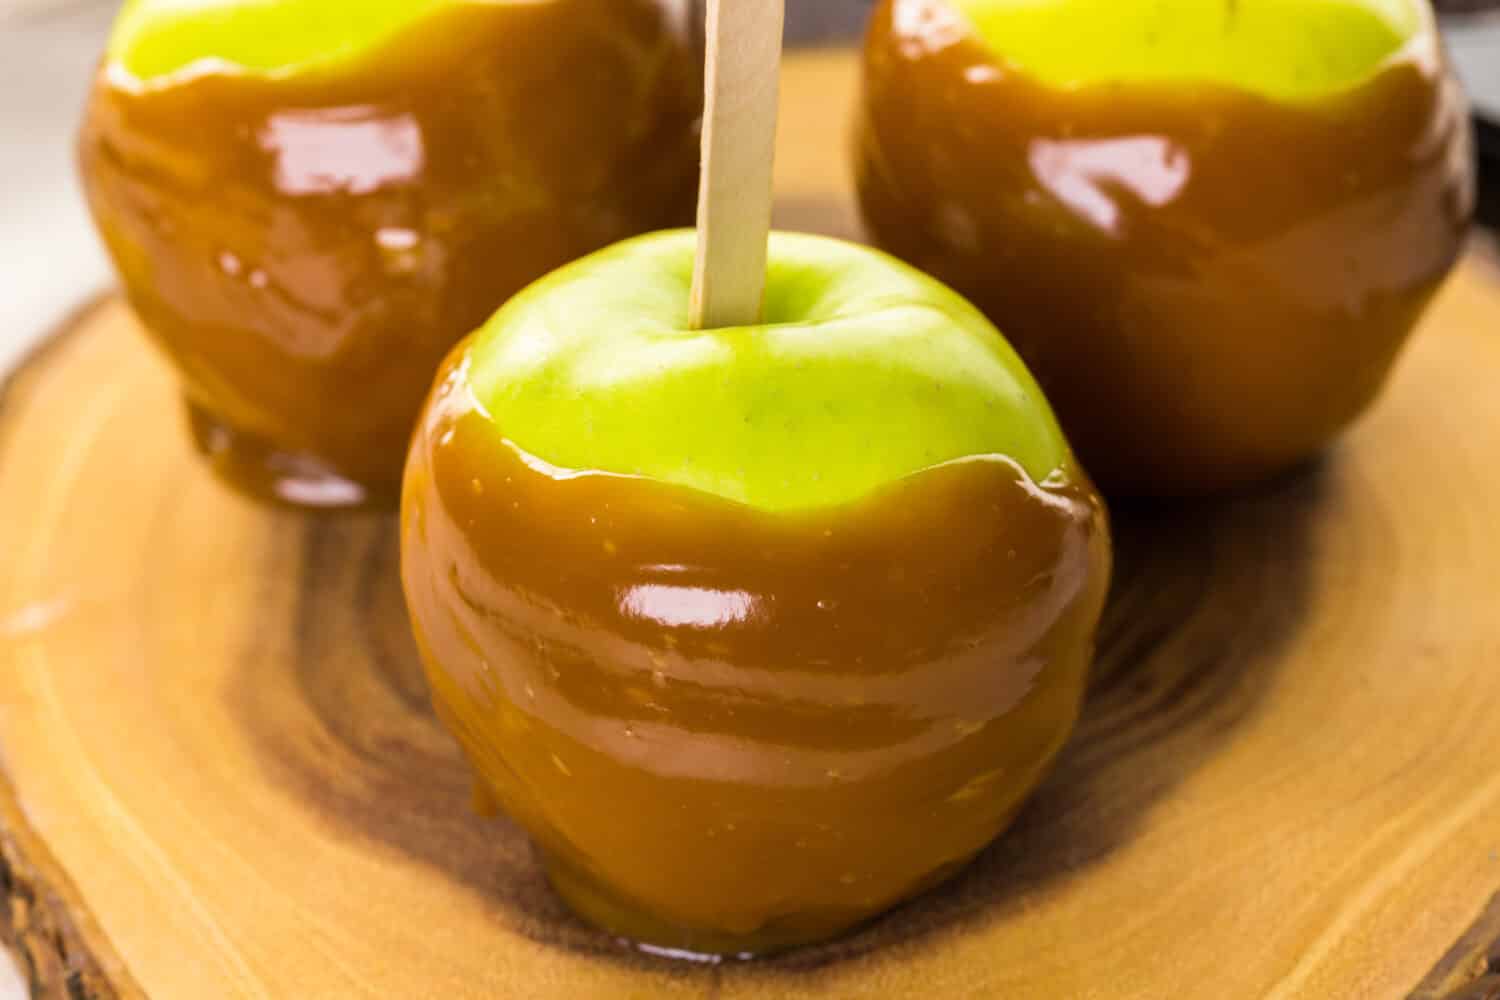 Apples freshly dipped in caramel on cutting board.